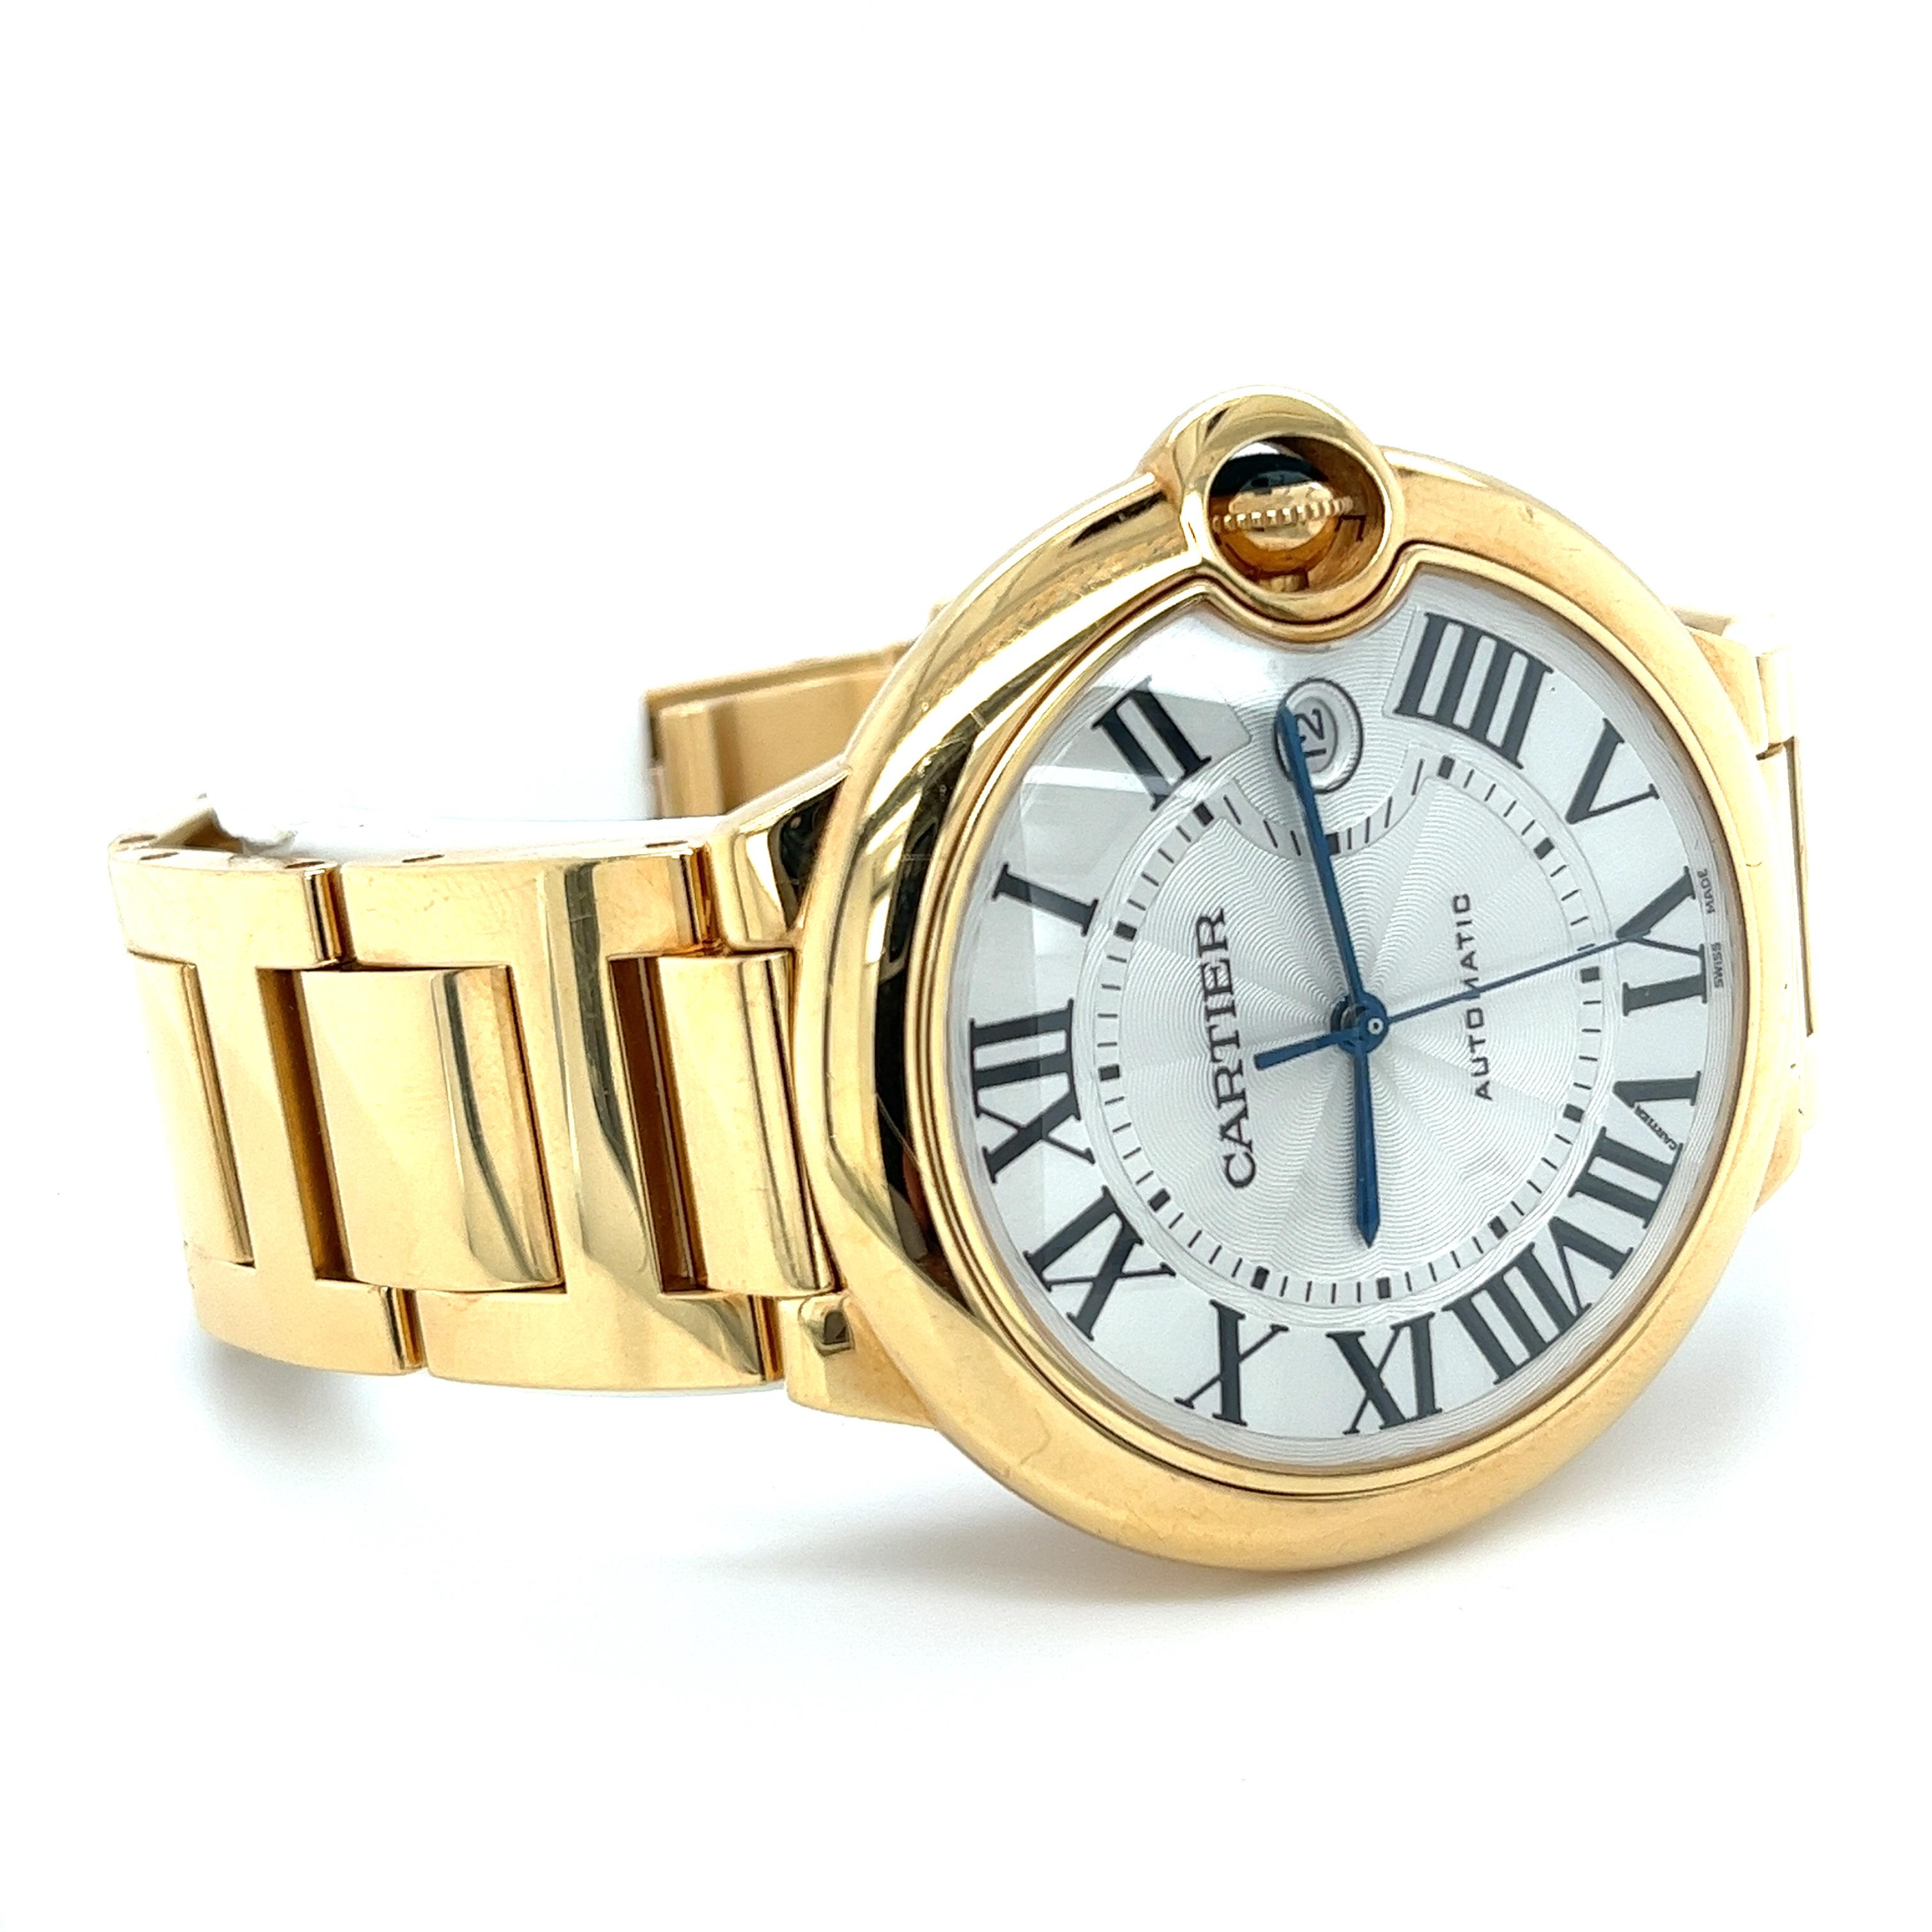 Cartier Ballon Bleu Jumbo Large Size Mens Watch in 18k Gold with Box/Papers For Sale 1